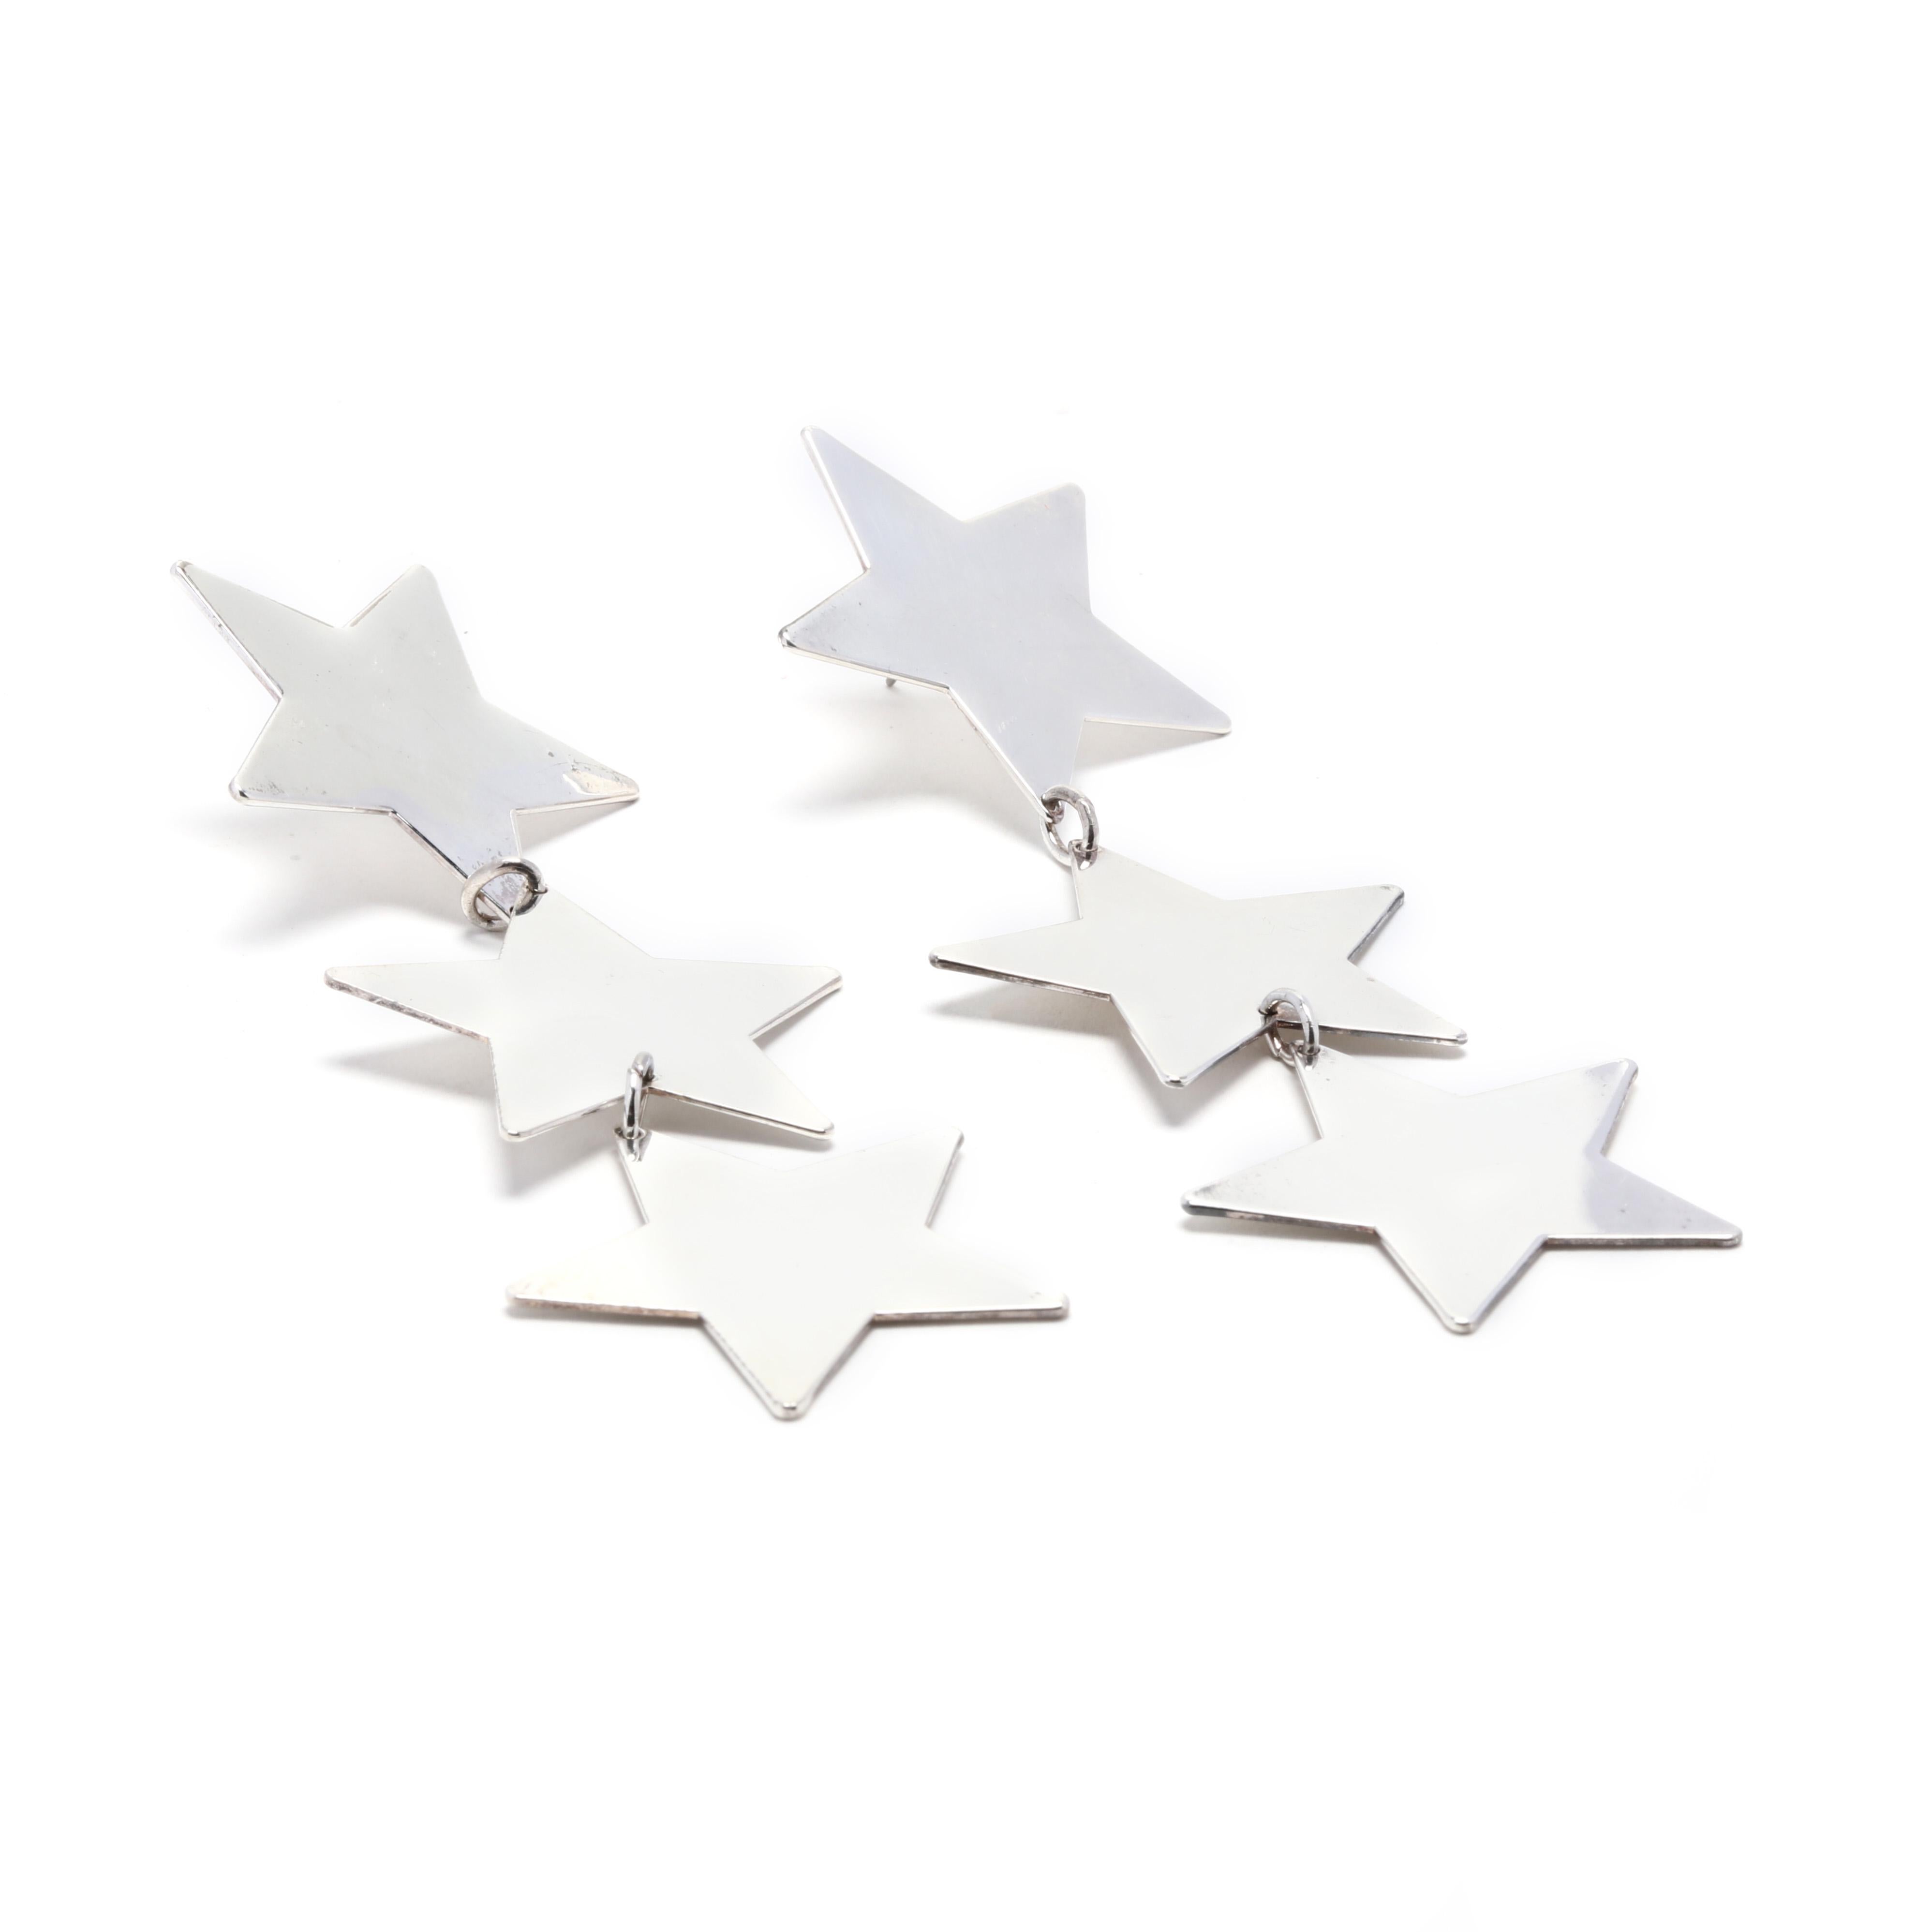 These stunning long star earrings in sterling silver will take your look to the next level! Crafted from tarnish-resistant sterling silver, these star earrings measure 3.75 inches in length and feature a dangling star shape that will certainly turn